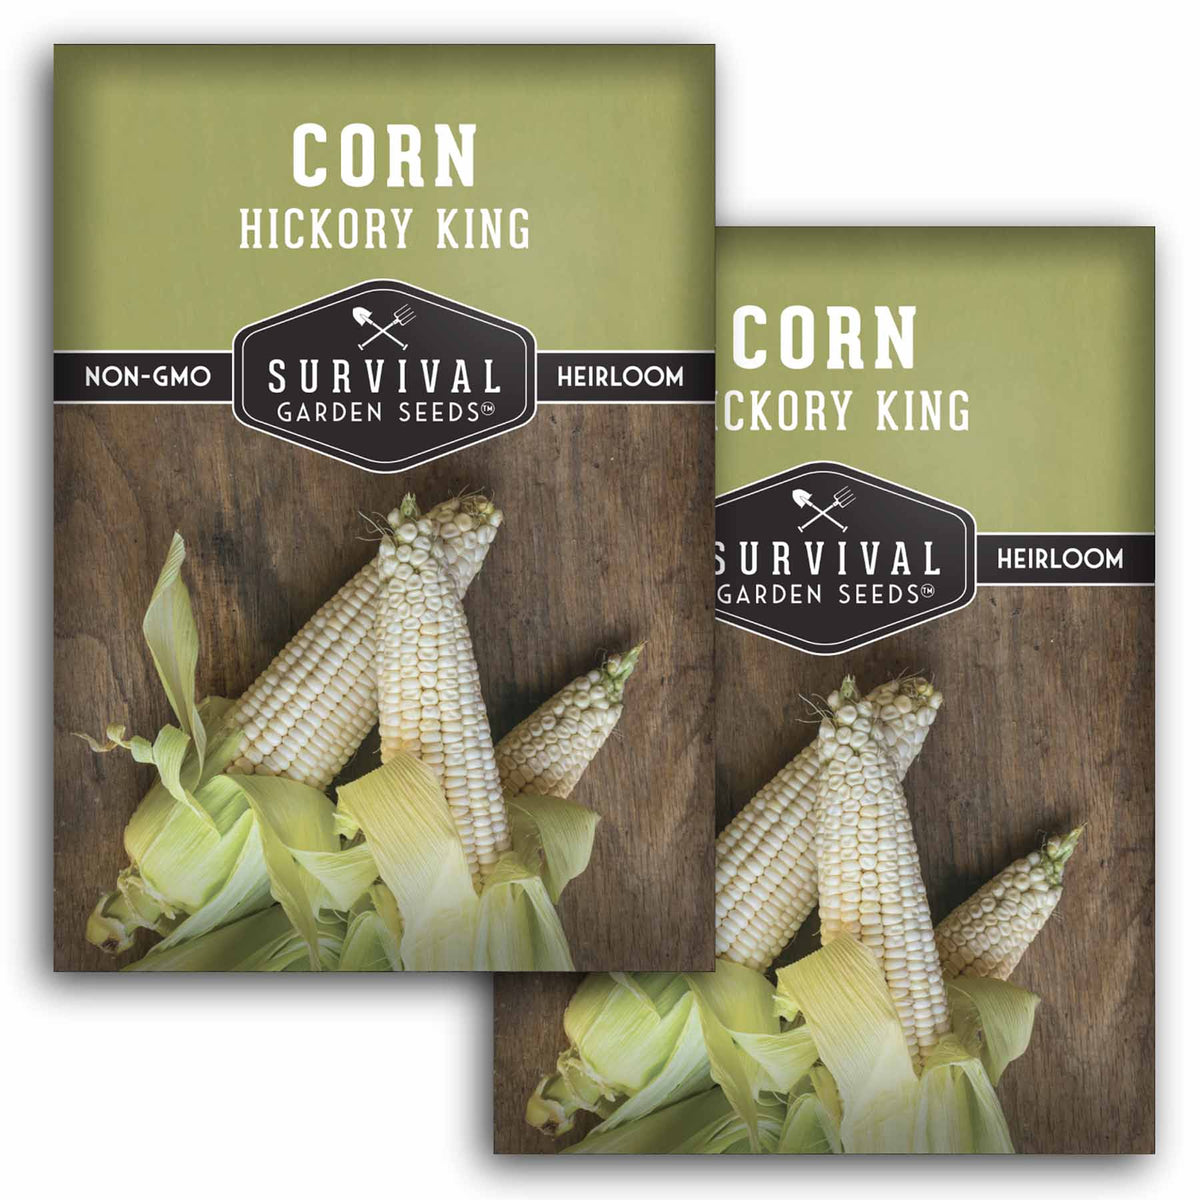 2 packets of Hickory King Corn seeds